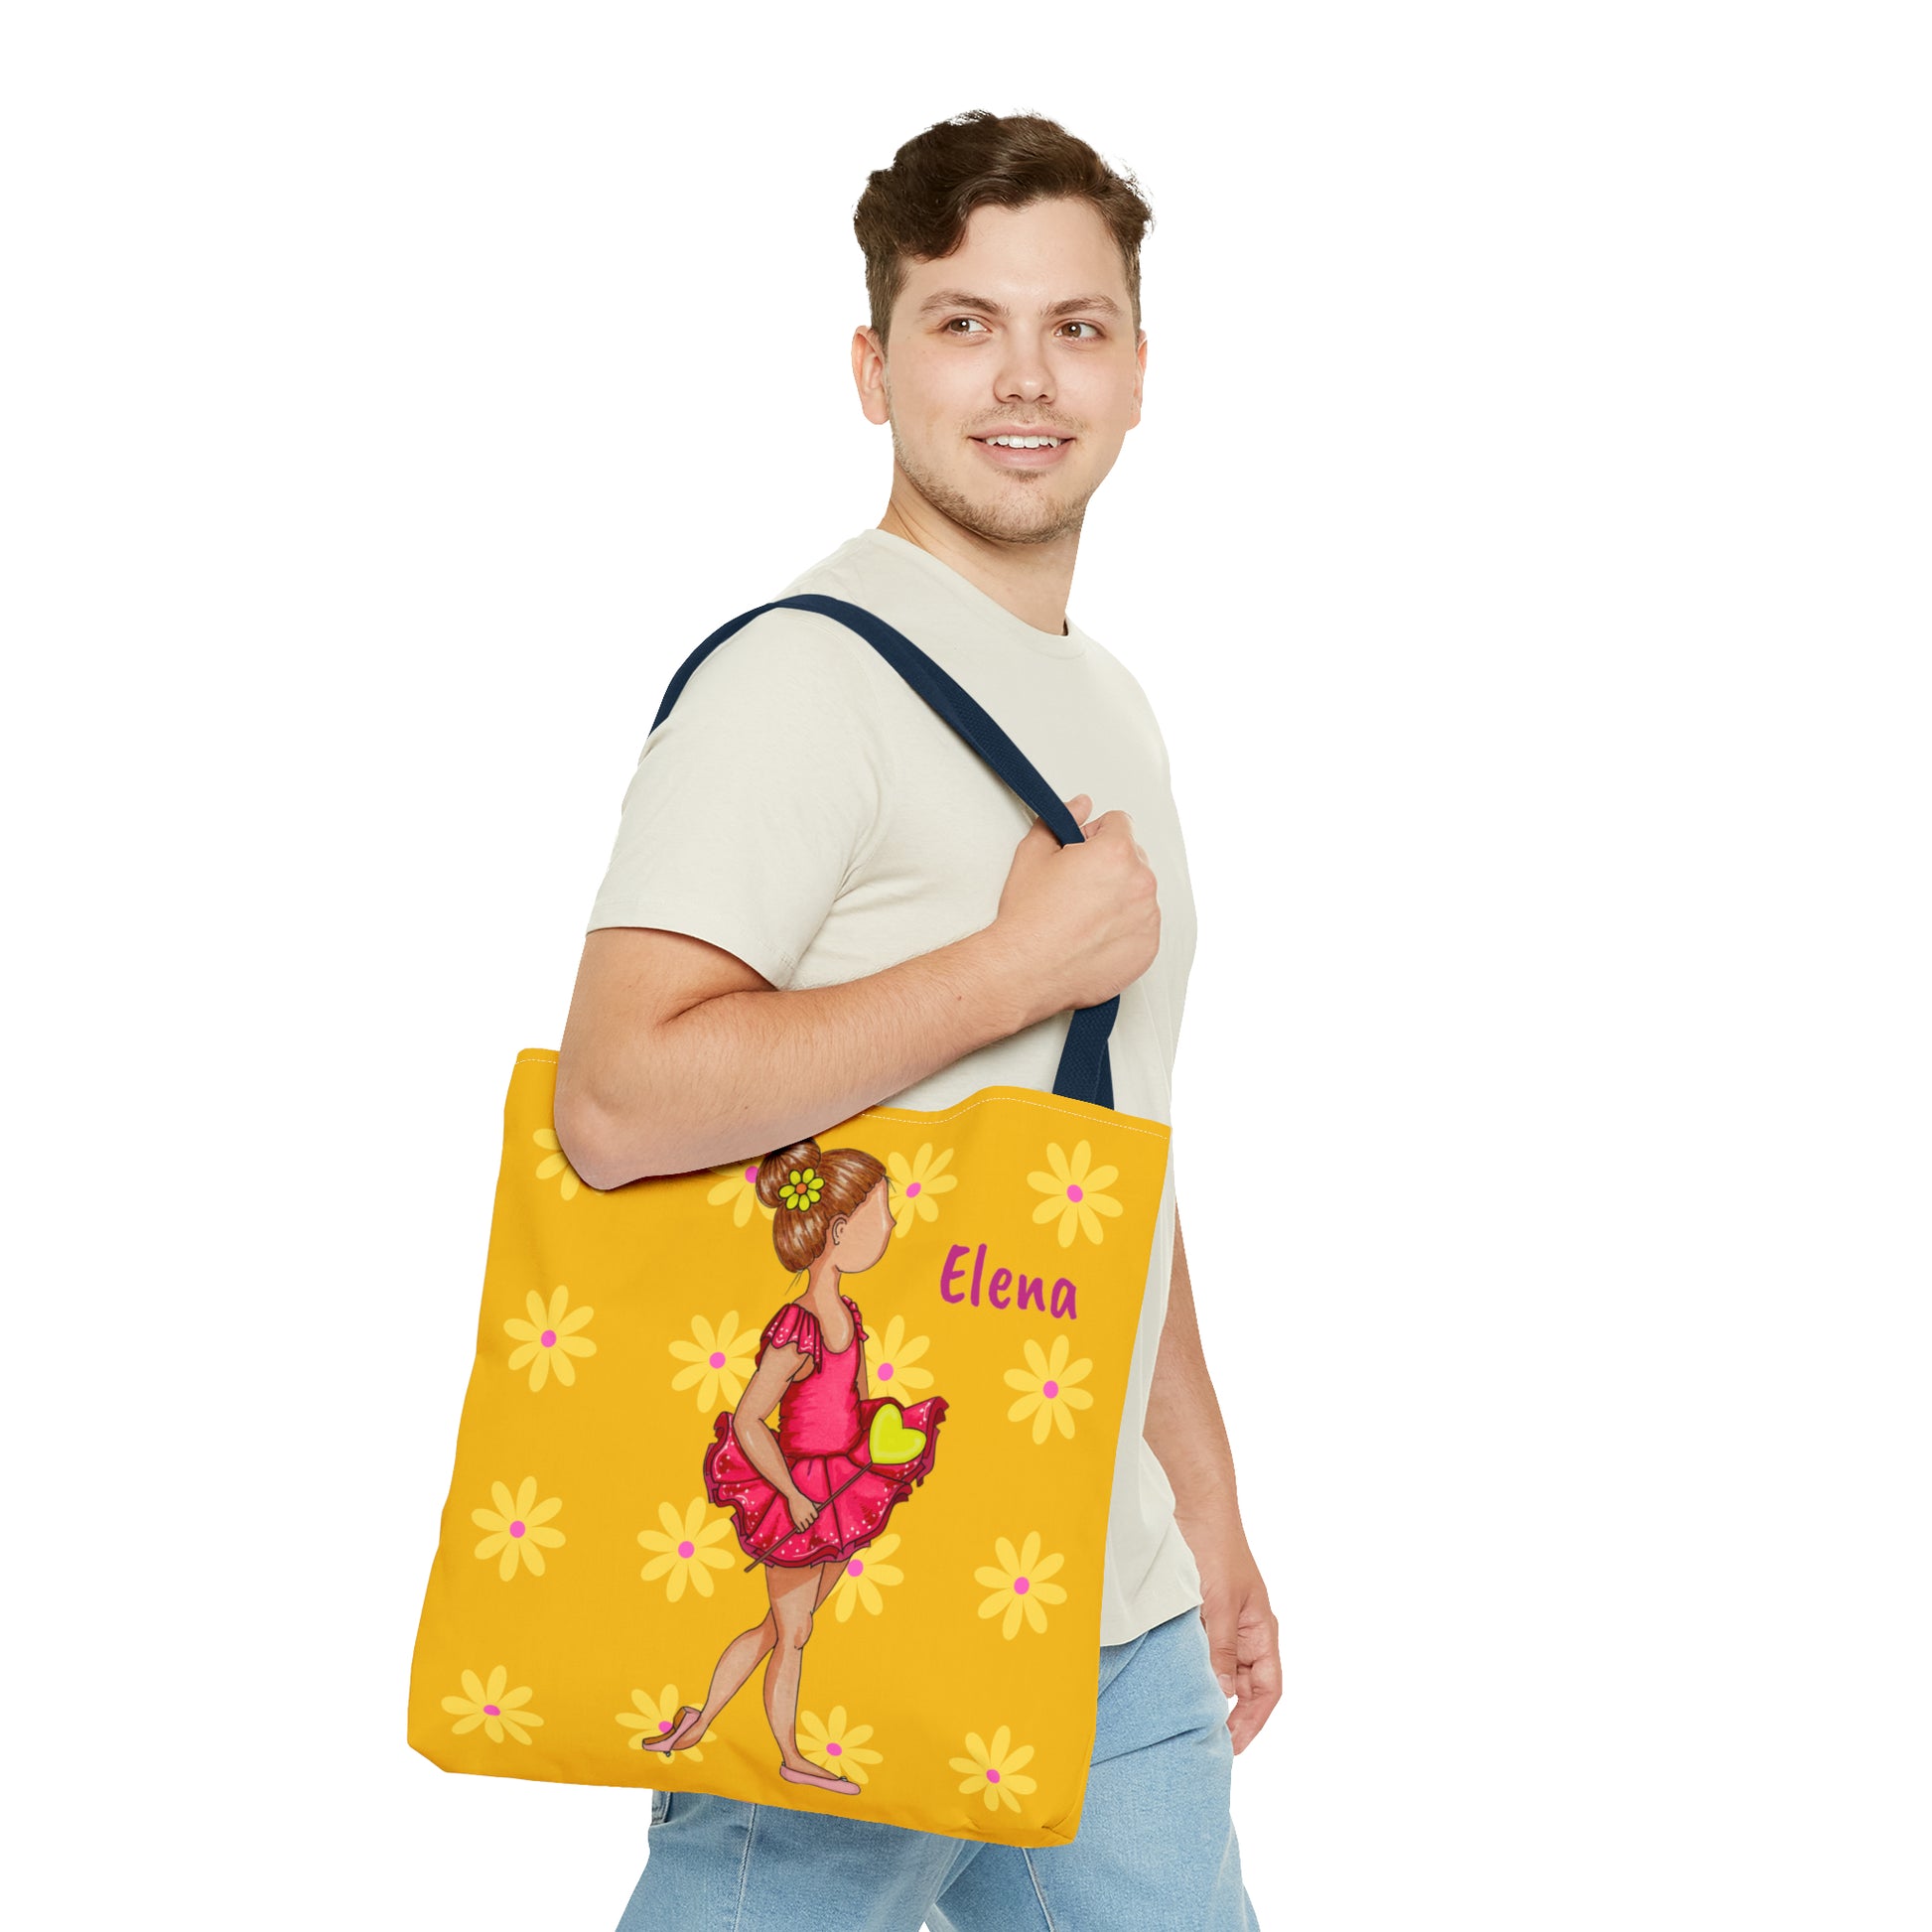 a man holding a yellow bag with a picture of a woman on it